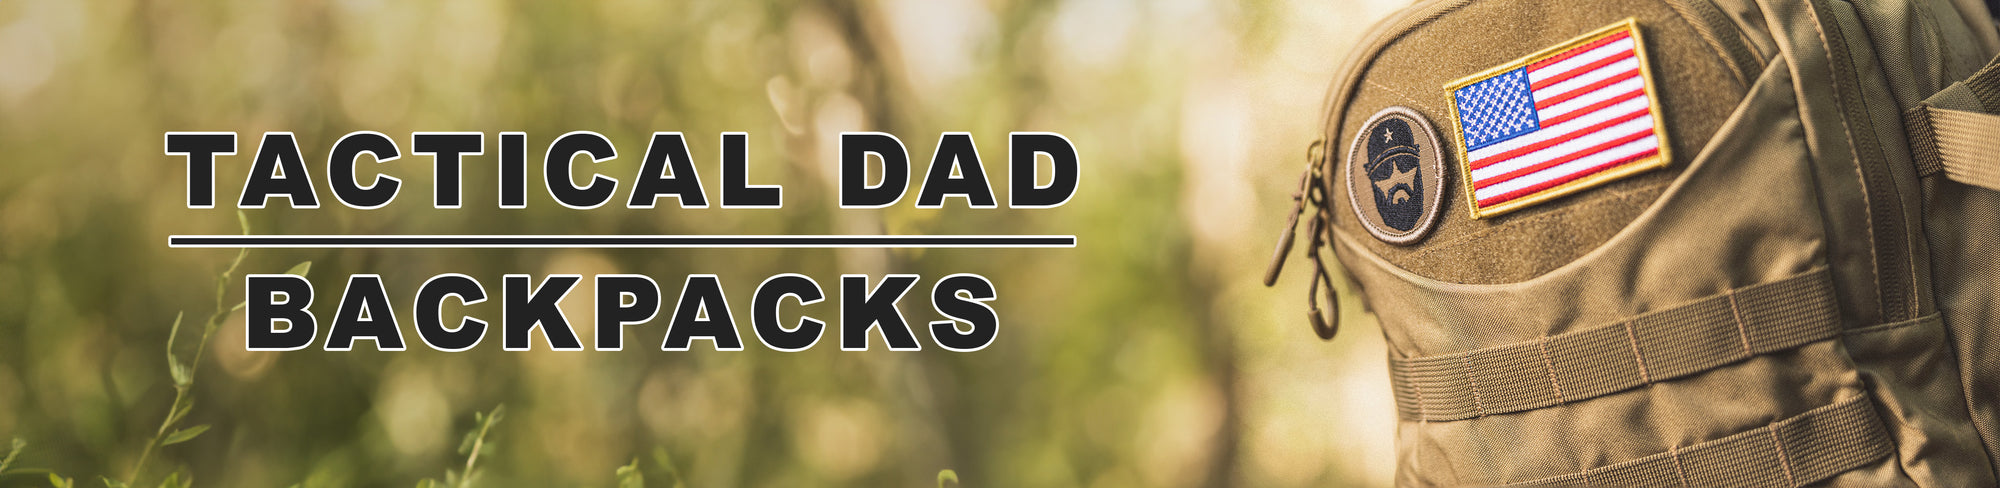 Tactical Dad Backpacks Banner with Tactical Dad backpack and patch